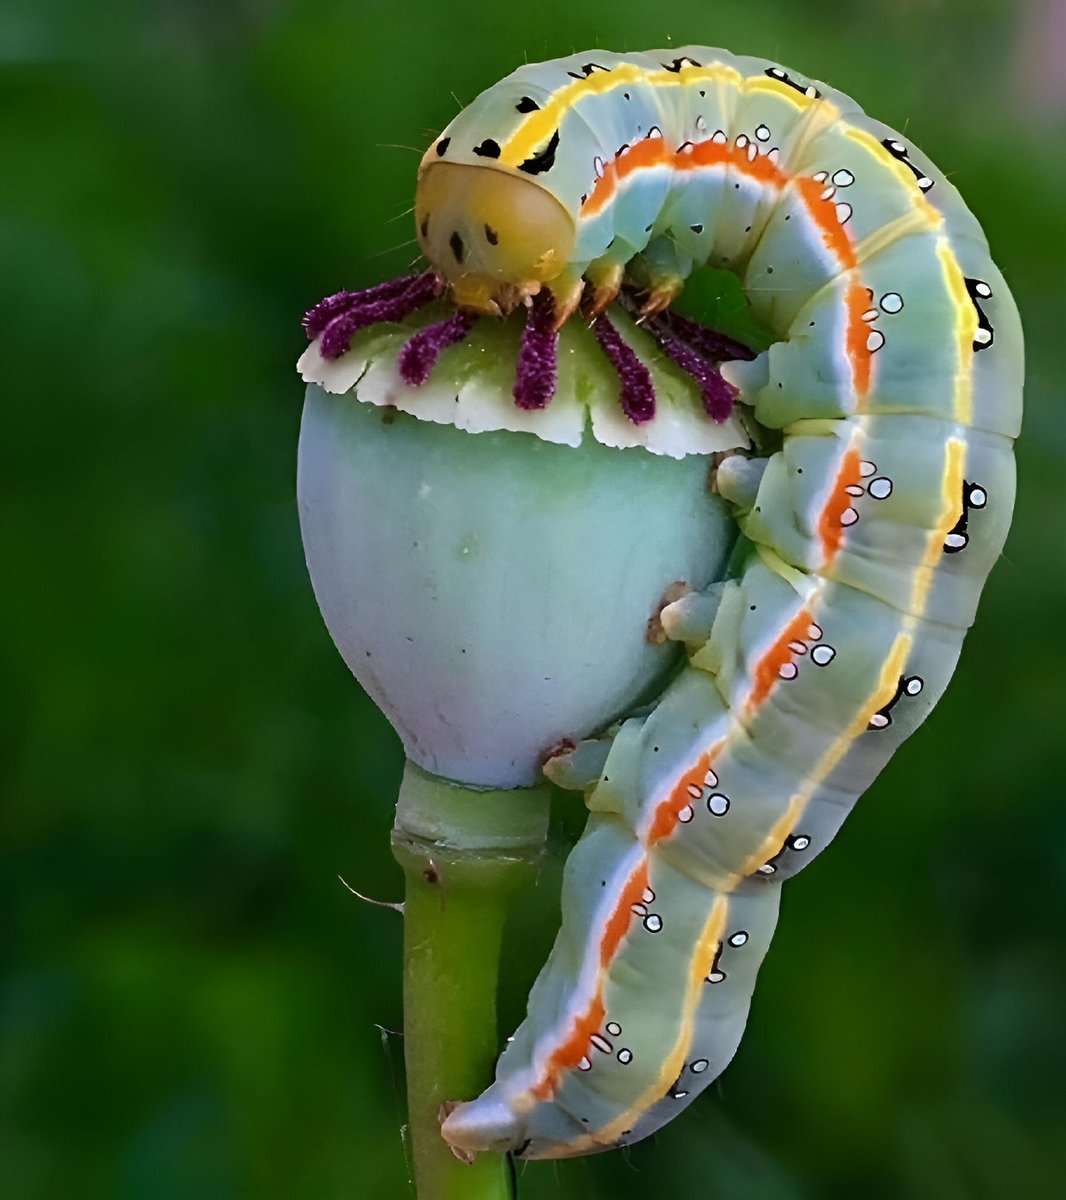 Just a caterpillar feasting on a poppy. From u/Gainsborough-Smythe on /r/mostbeautiful